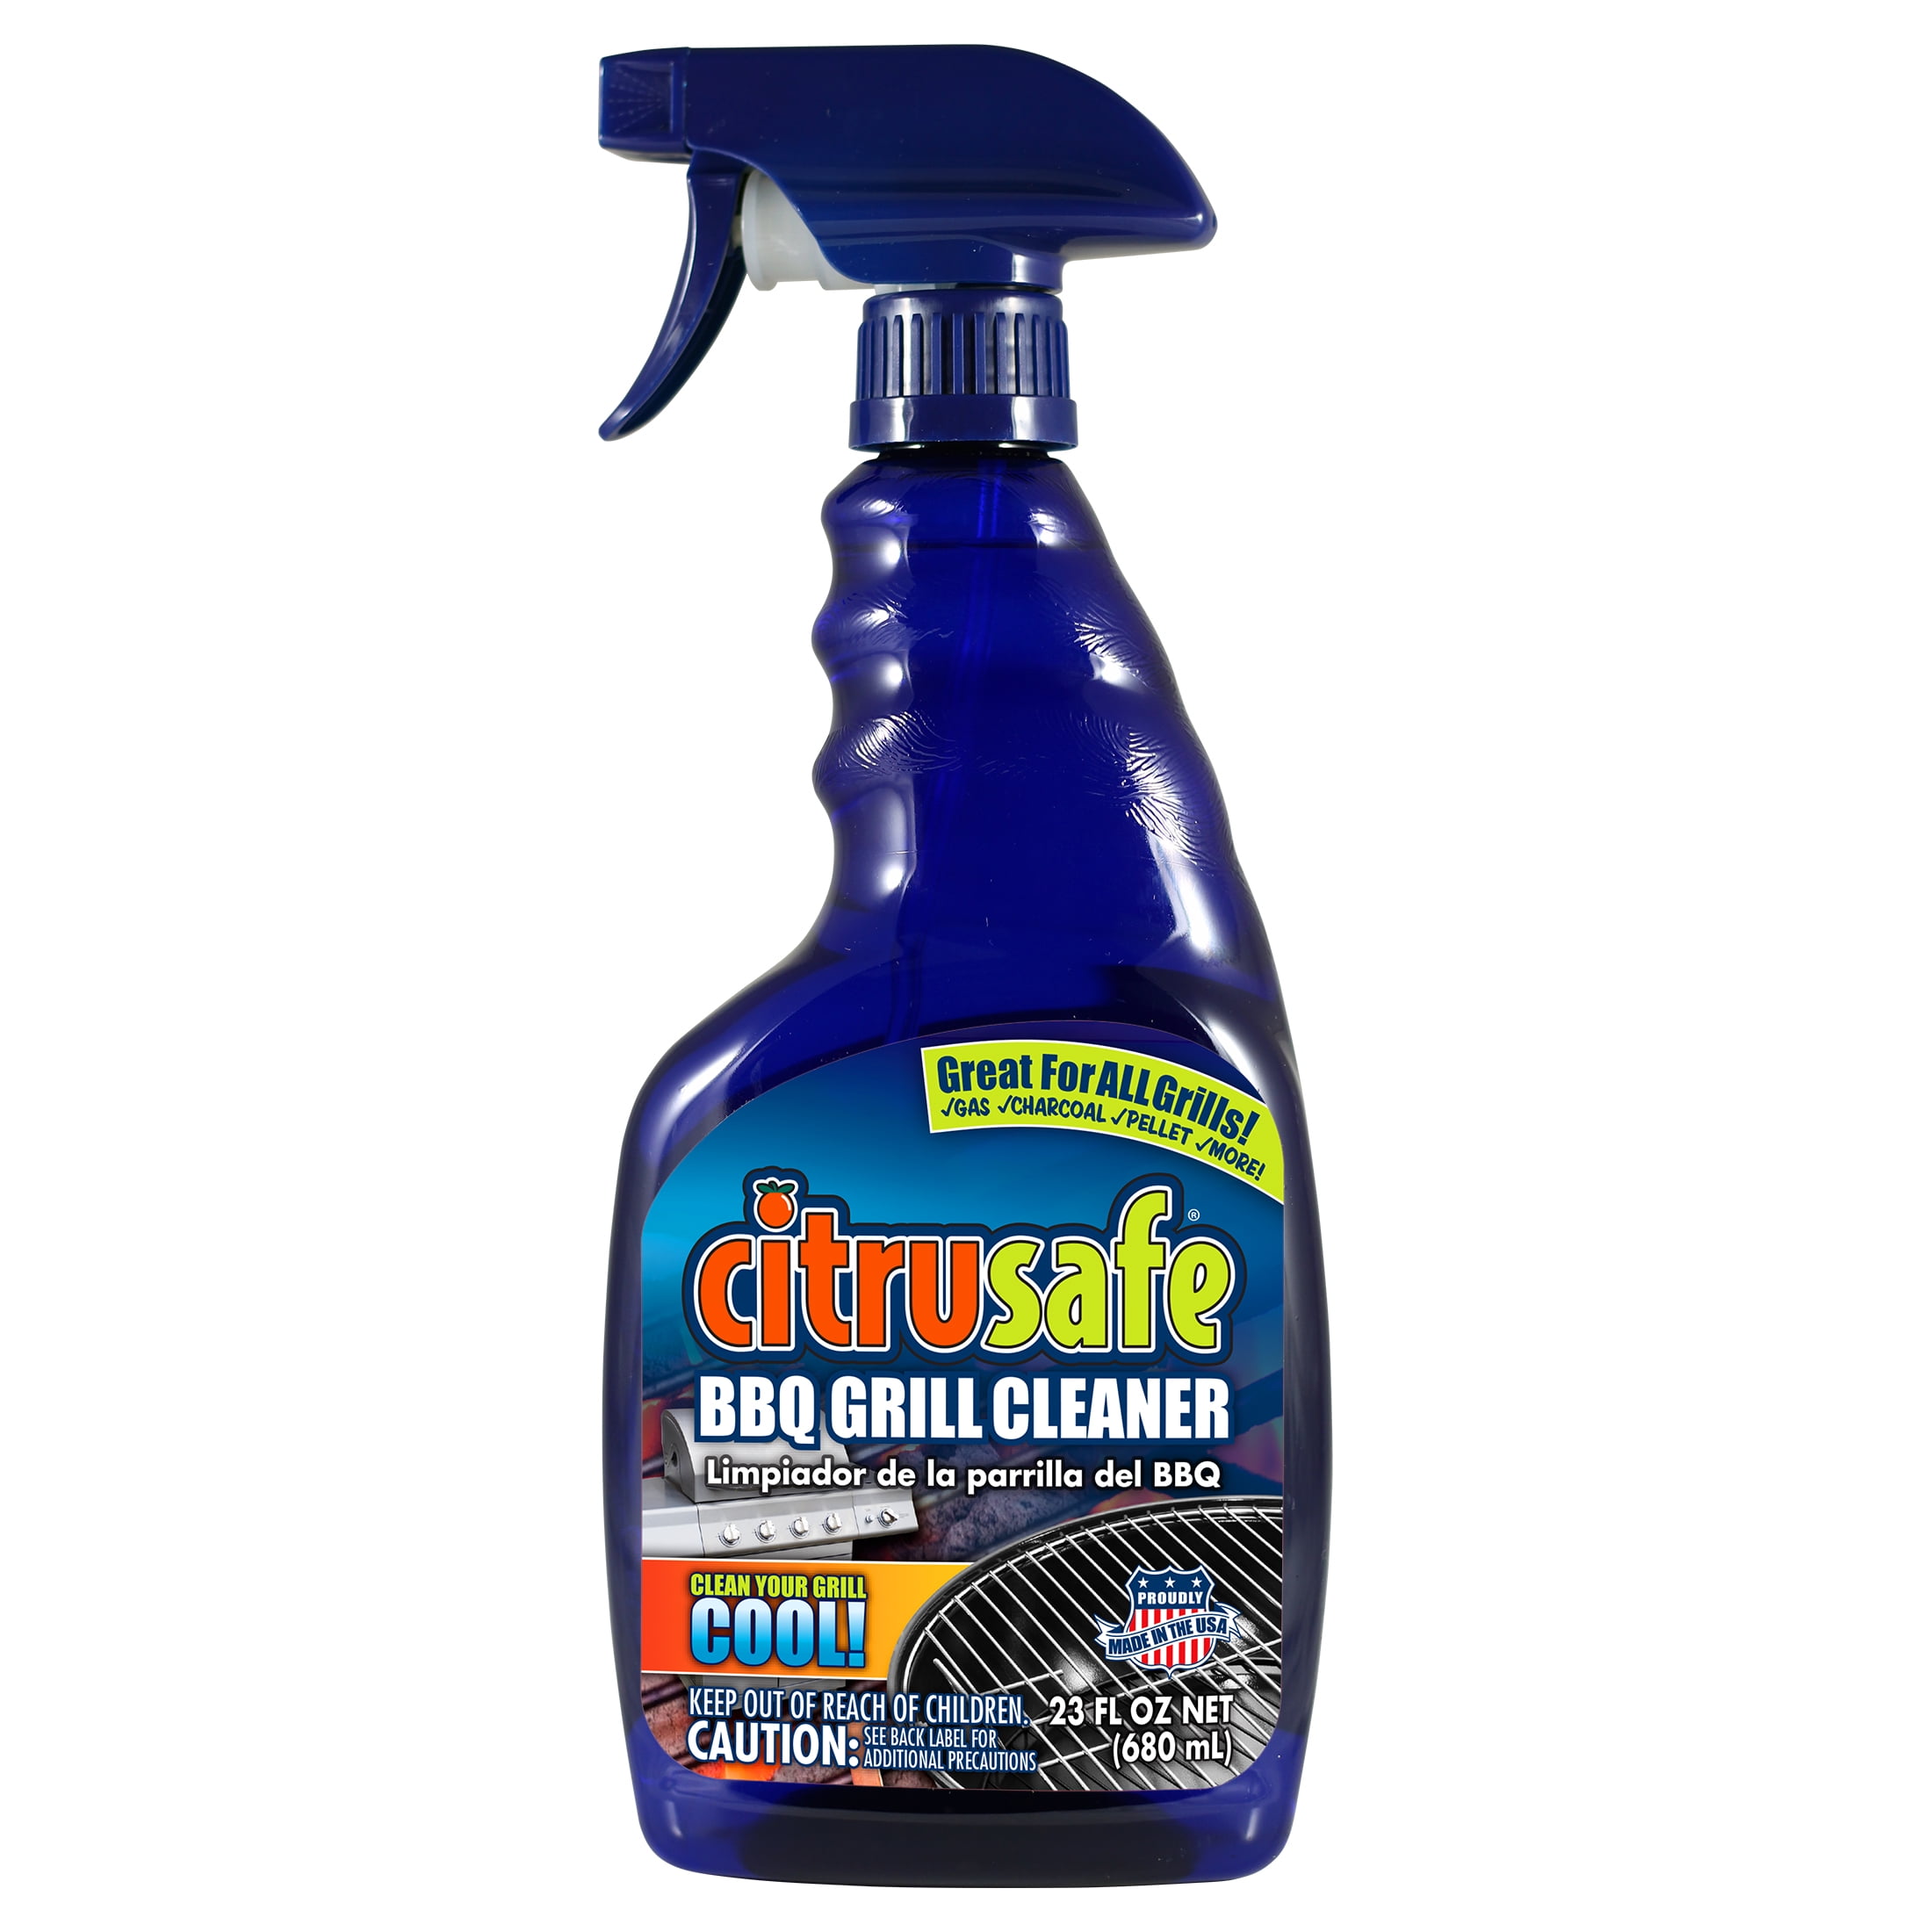 Citrusafe BBQ Grill and Grate Cleaner, for All Grills, and Most Cooking Grids